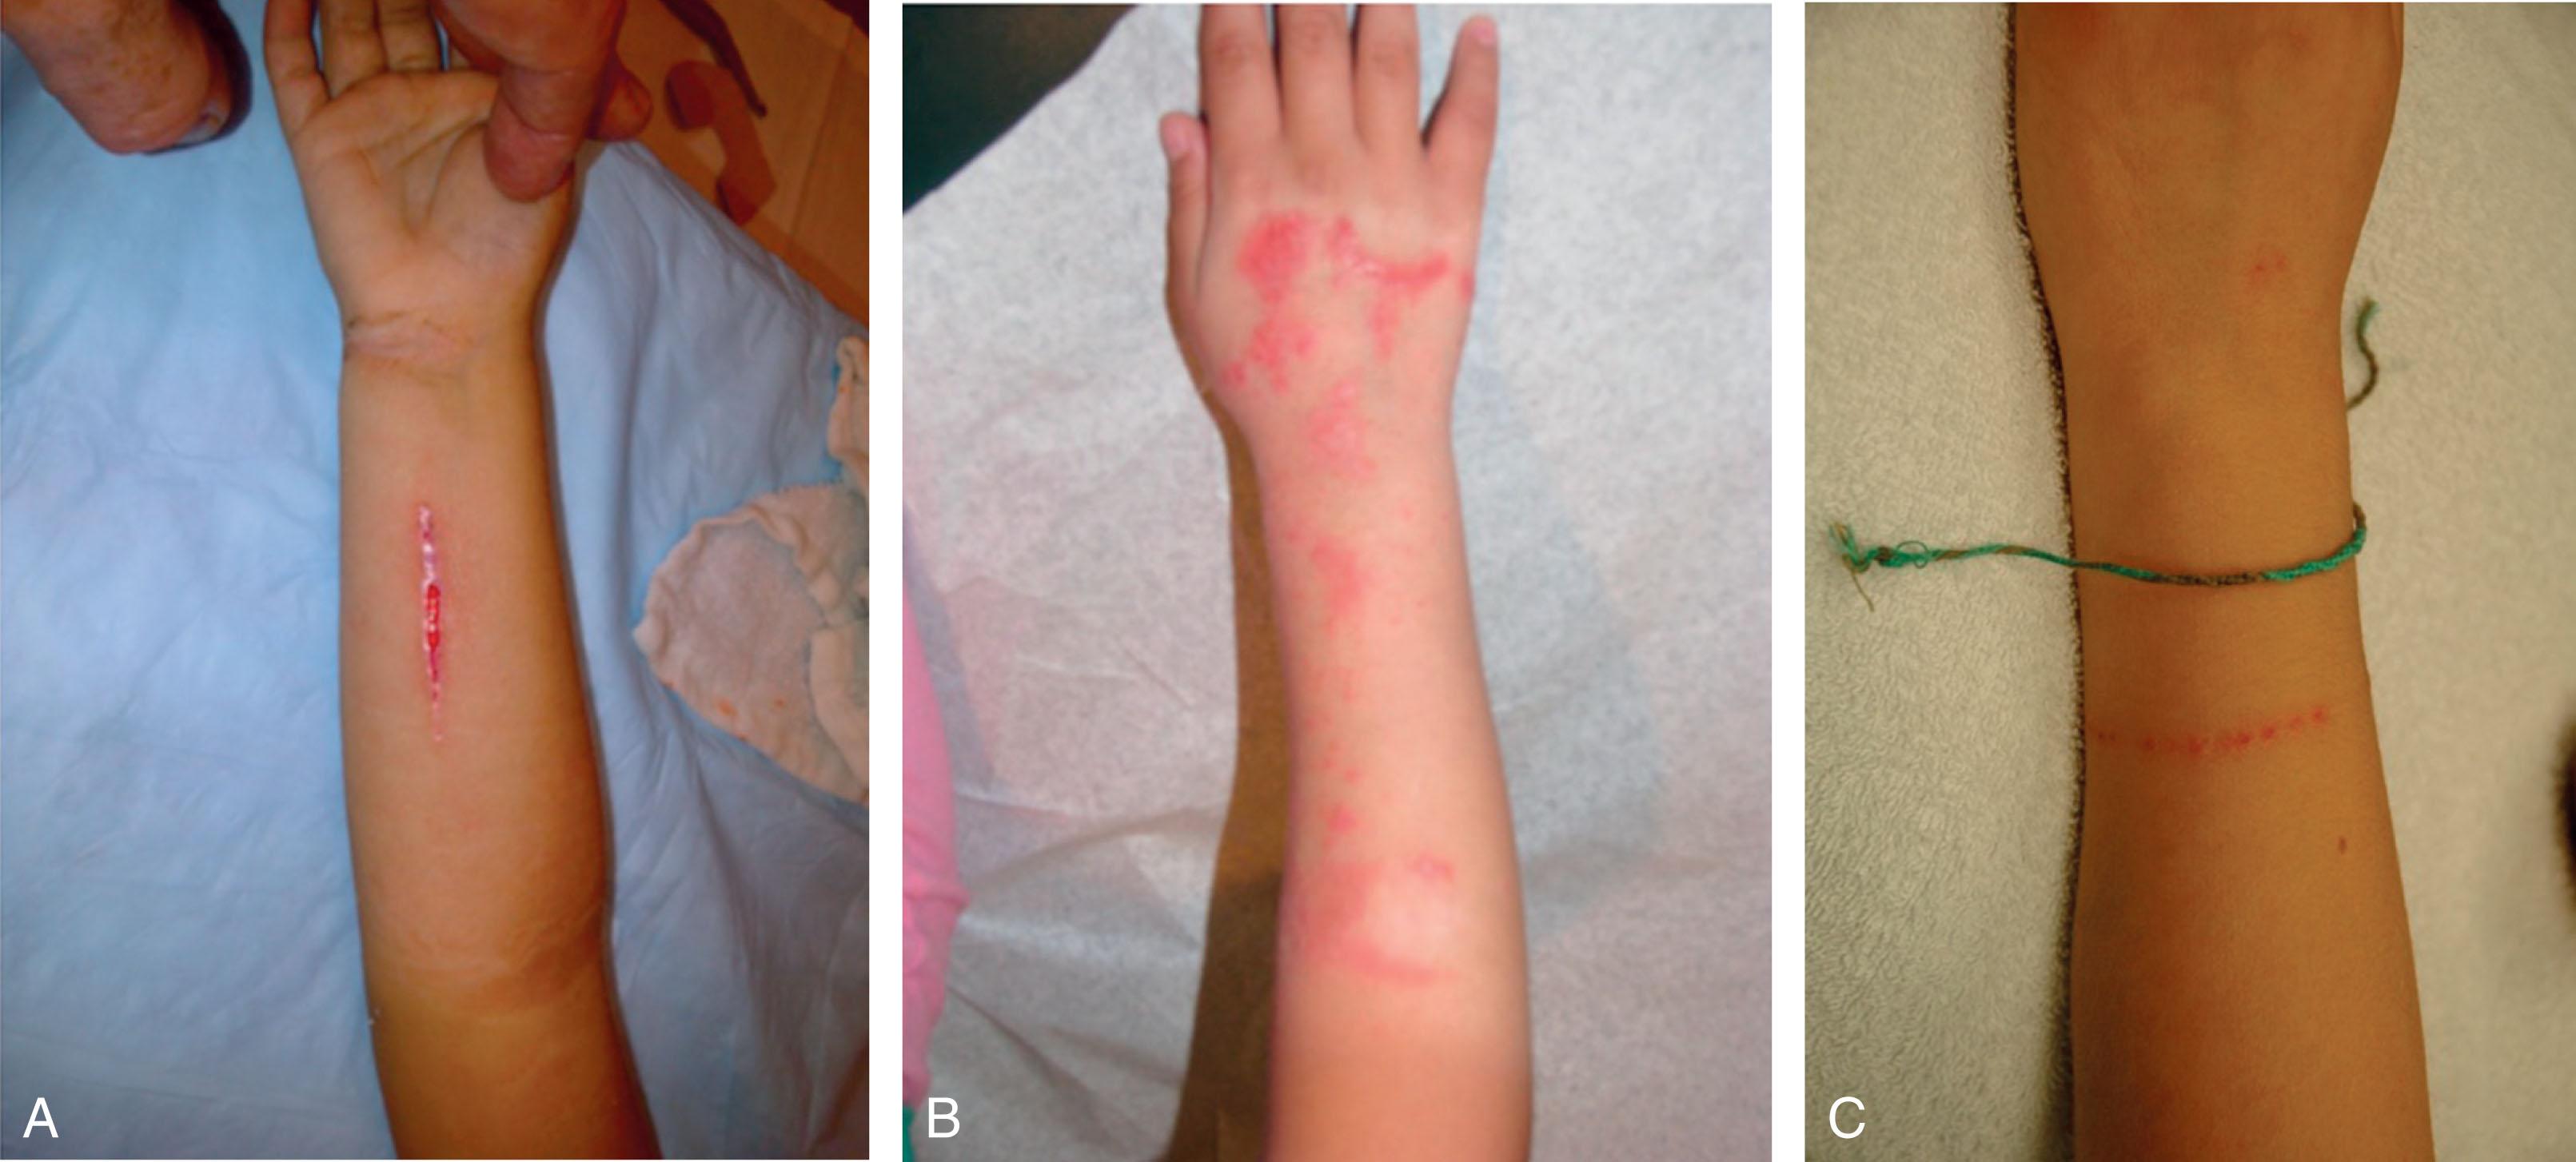 Fig. 5.3, Complications After Cast Application. (A) Burns resulting from improper cast saw technique. (B) Skin breakdown from prolonged water exposure to the cast padding. (C) Pressure sore from a foreign object (bracelet) between the cast and skin.